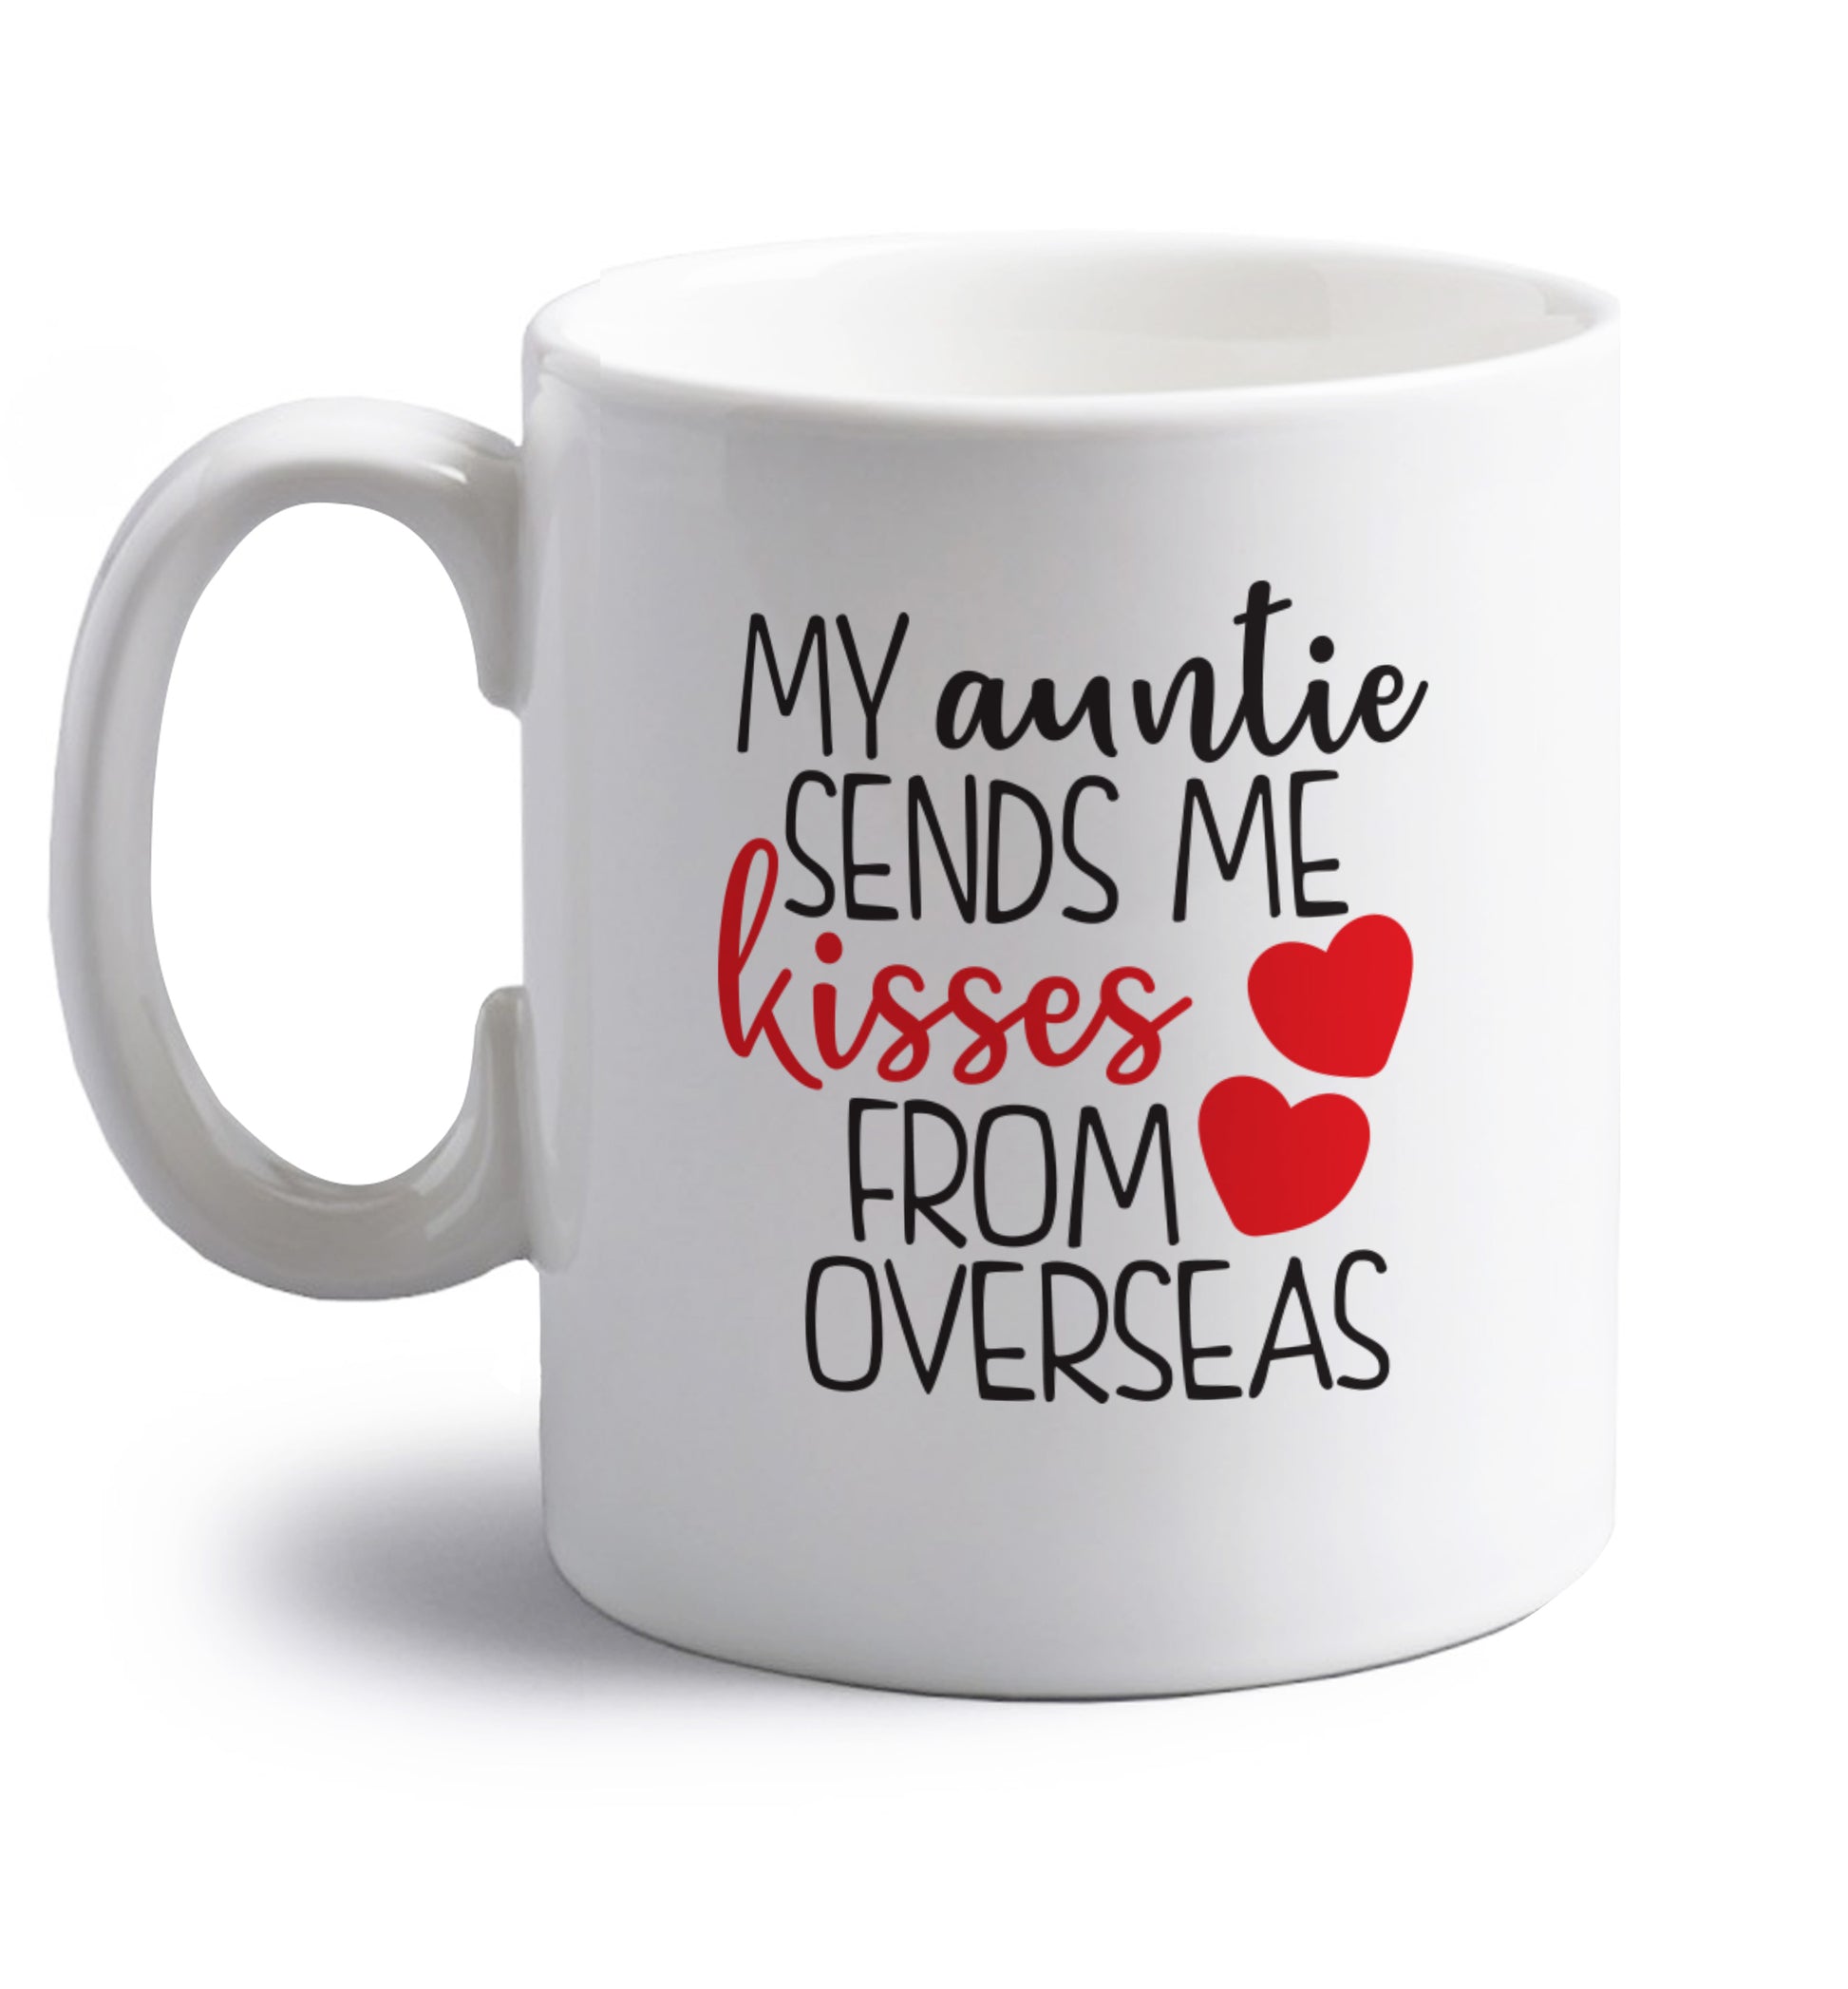 My auntie sends me kisses from overseas right handed white ceramic mug 